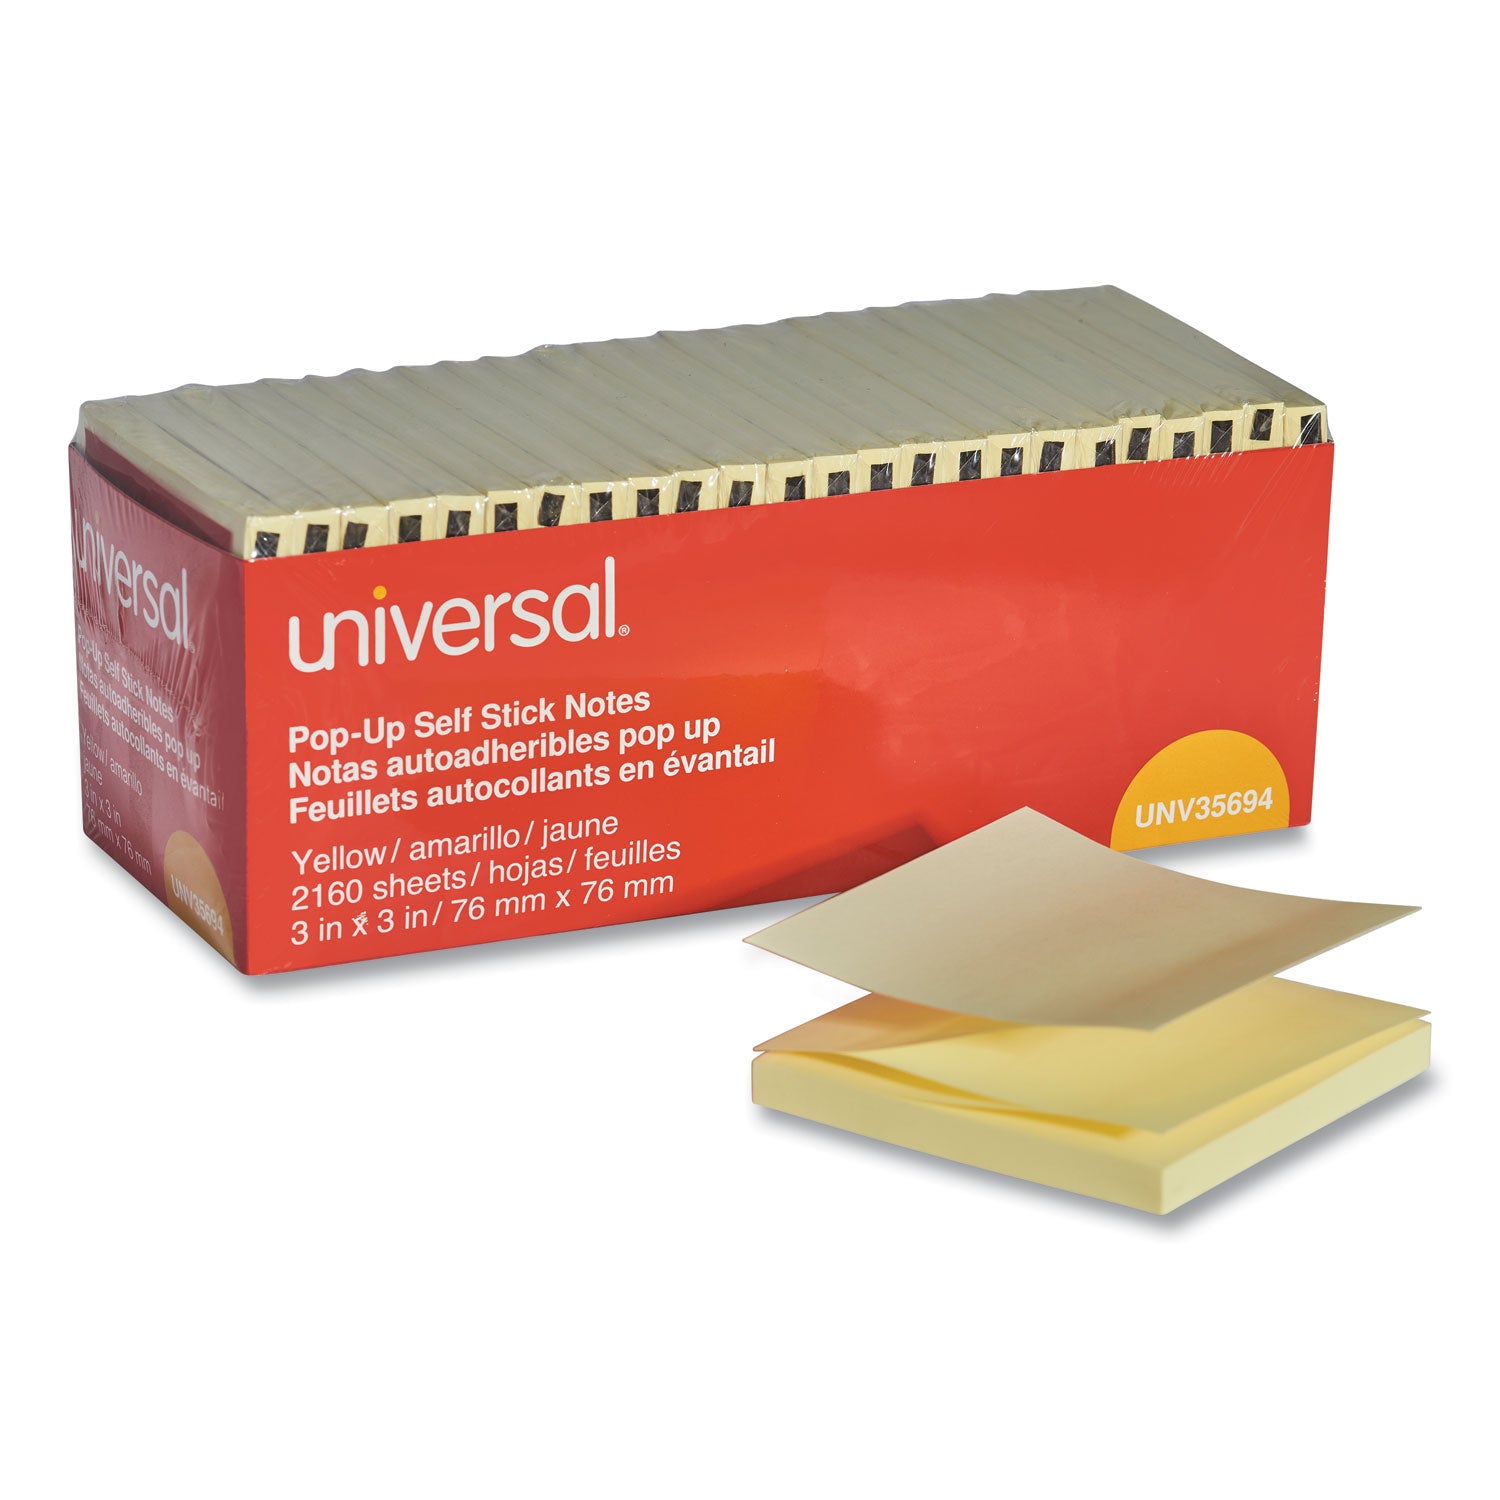 fan-folded-self-stick-pop-up-note-pads-cabinet-pack-3-x-3-yellow-90-sheets-pad-24-pads-pack_unv35694 - 1